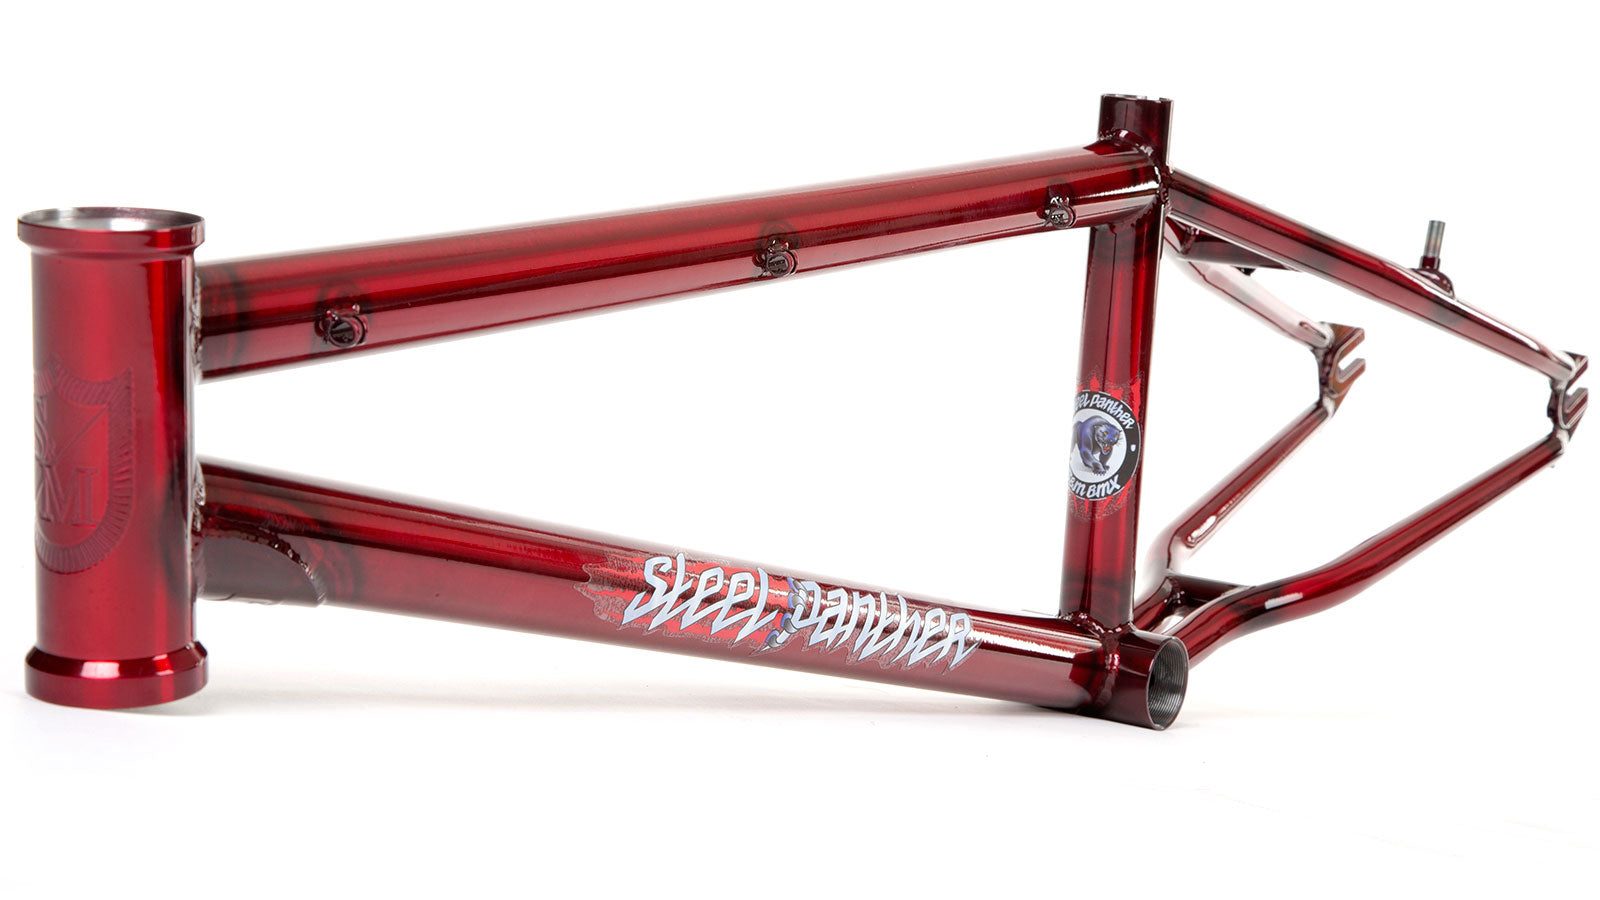 STEEL PANTHER FRAME 20.75" GLOSS BLACK